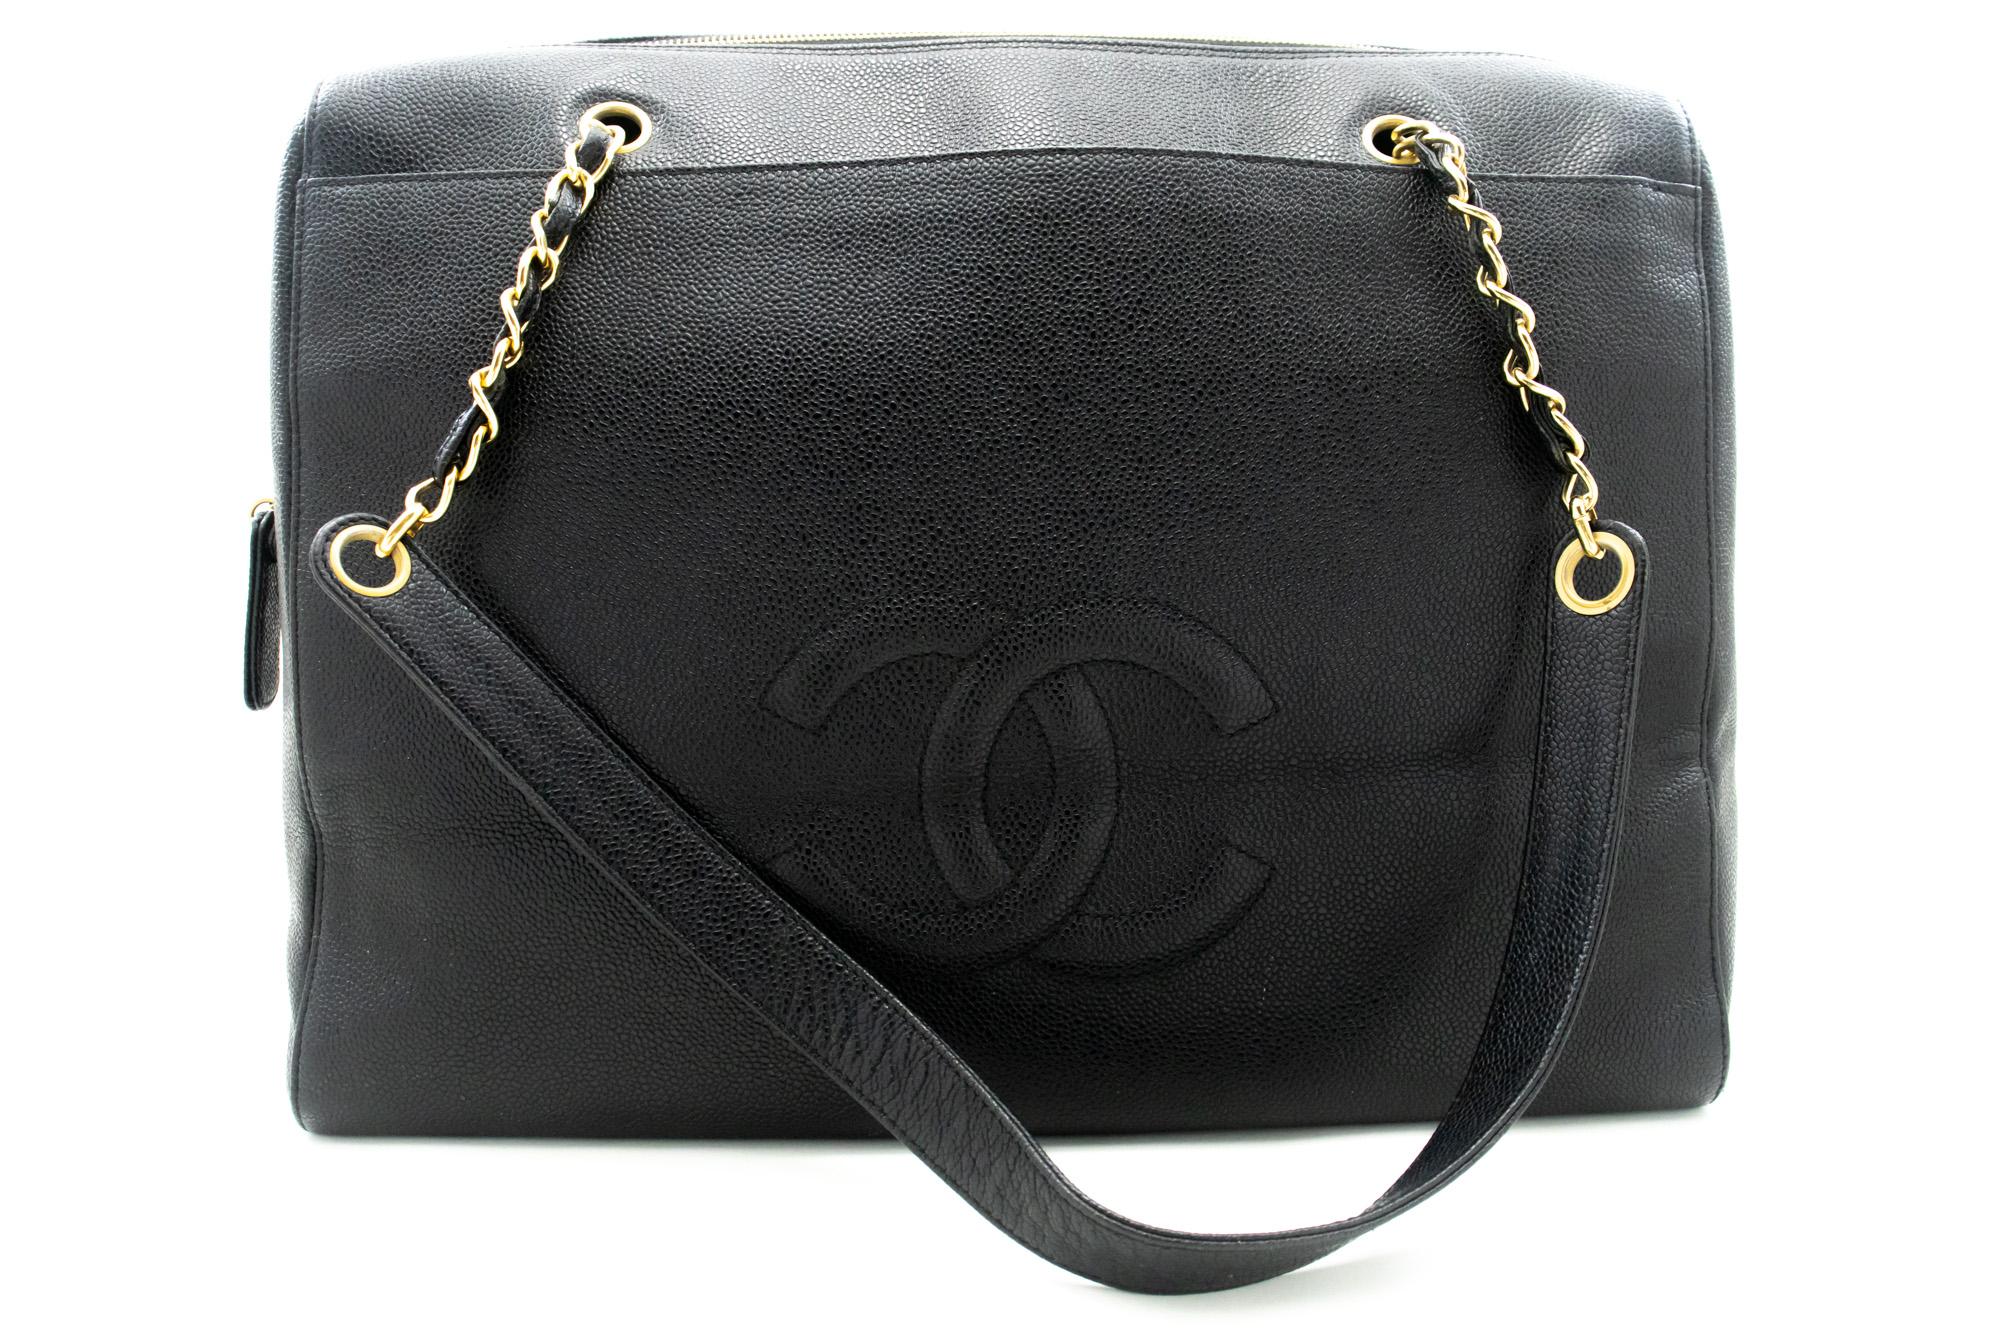 An authentic CHANEL Caviar Big Large Chain Shoulder Bag Black Leather Gold Zip. The color is Black. The outside material is Leather. The pattern is Solid. This item is Vintage / Classic. The year of manufacture would be 1997-1999.
Conditions &